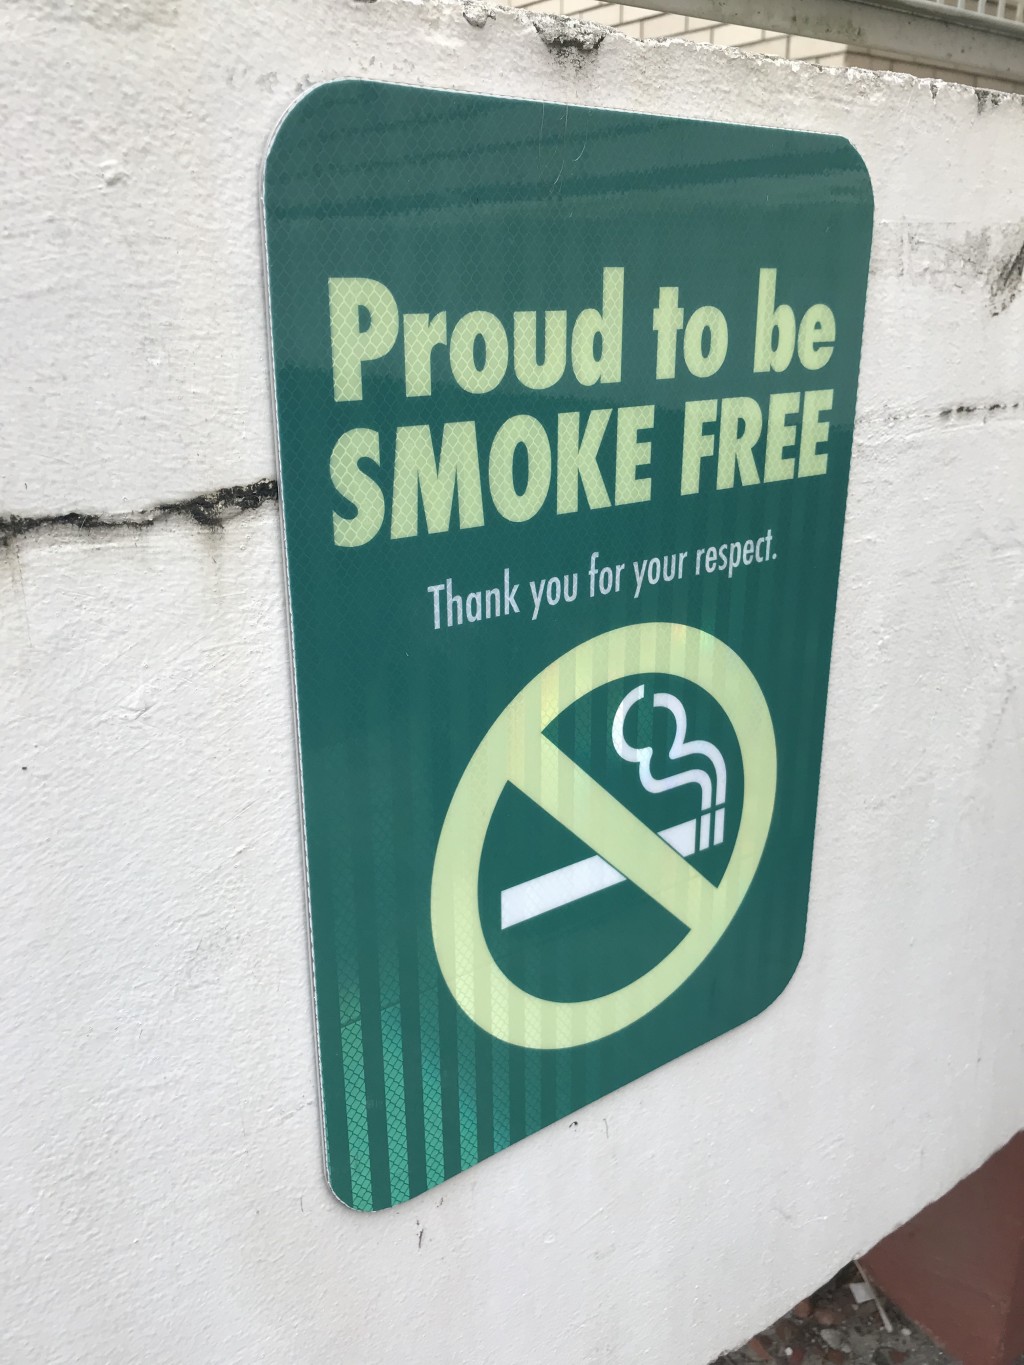 International students question tobacco-free  policy following email reminder